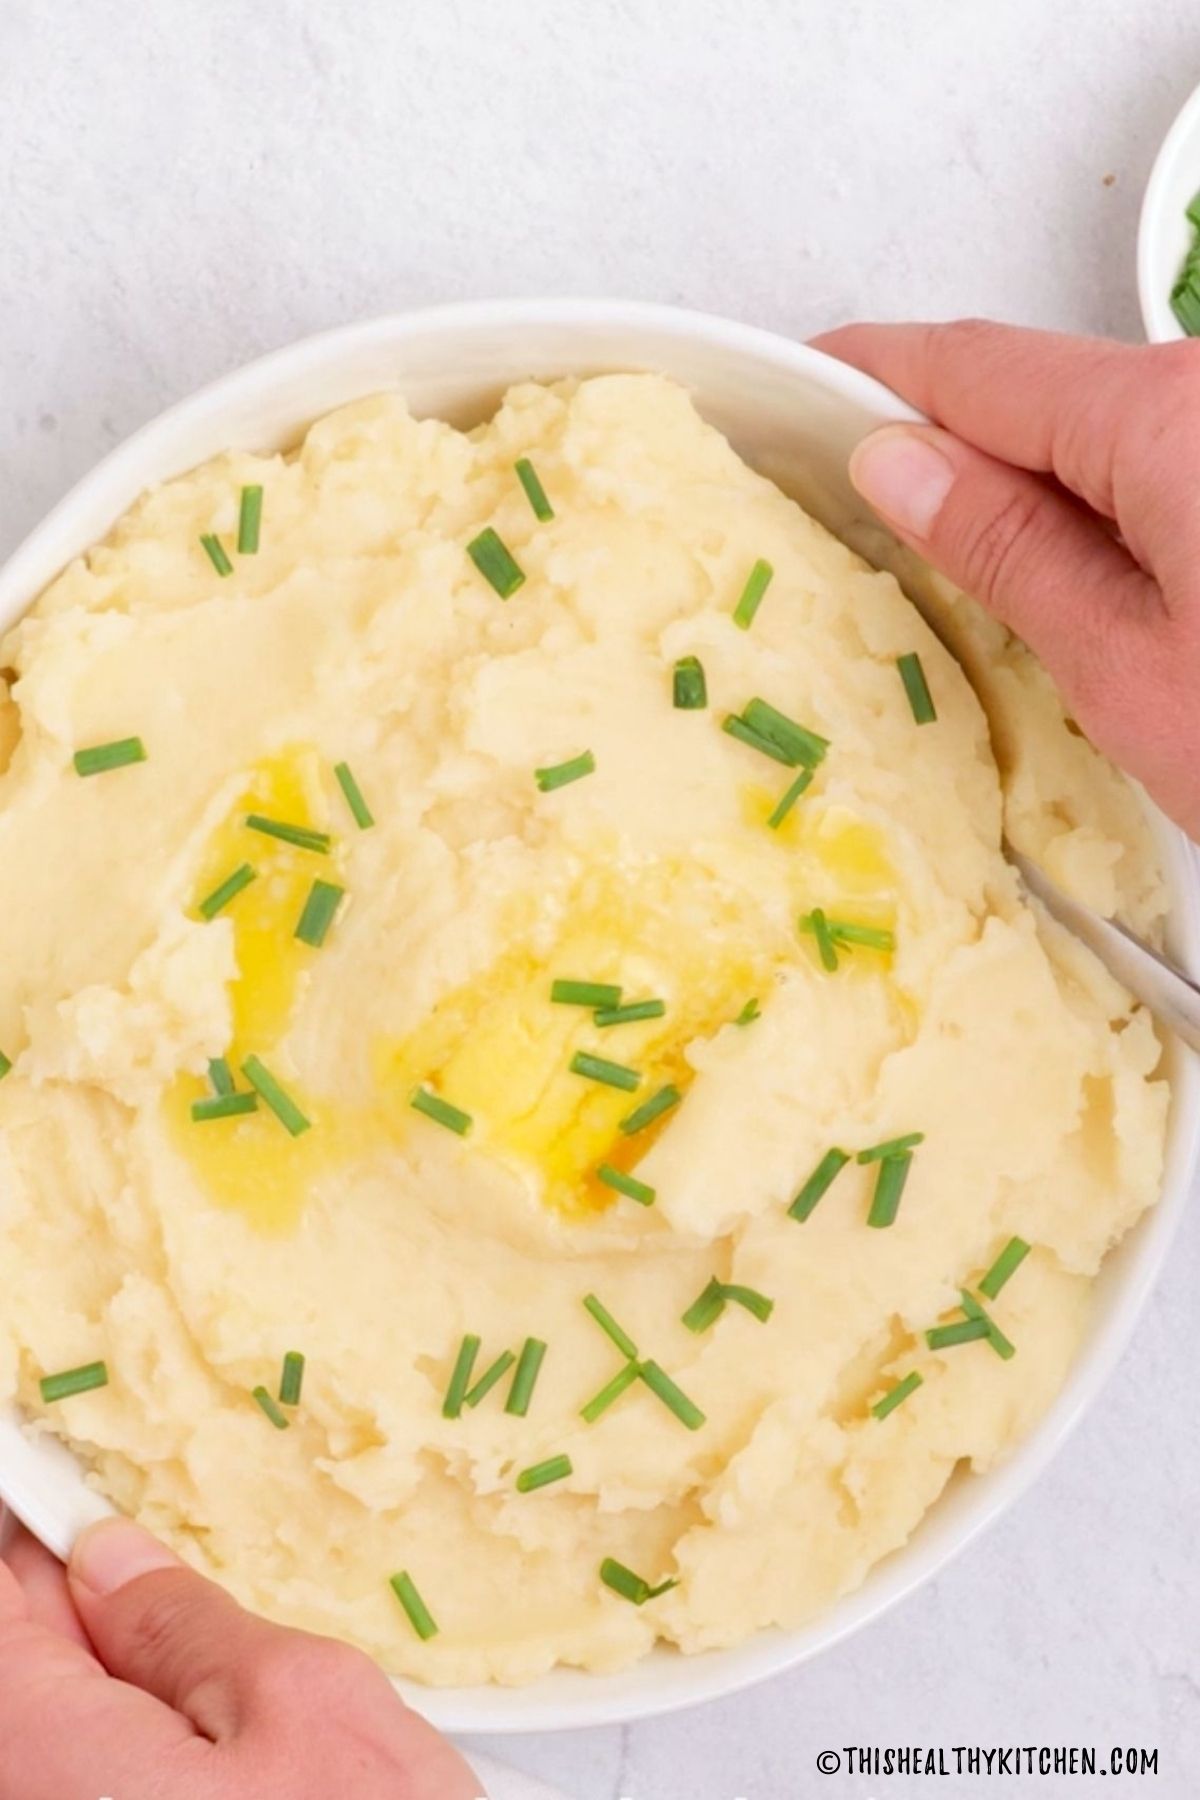 Hand holding up dish filled with mashed potatoes and garnished with chives.